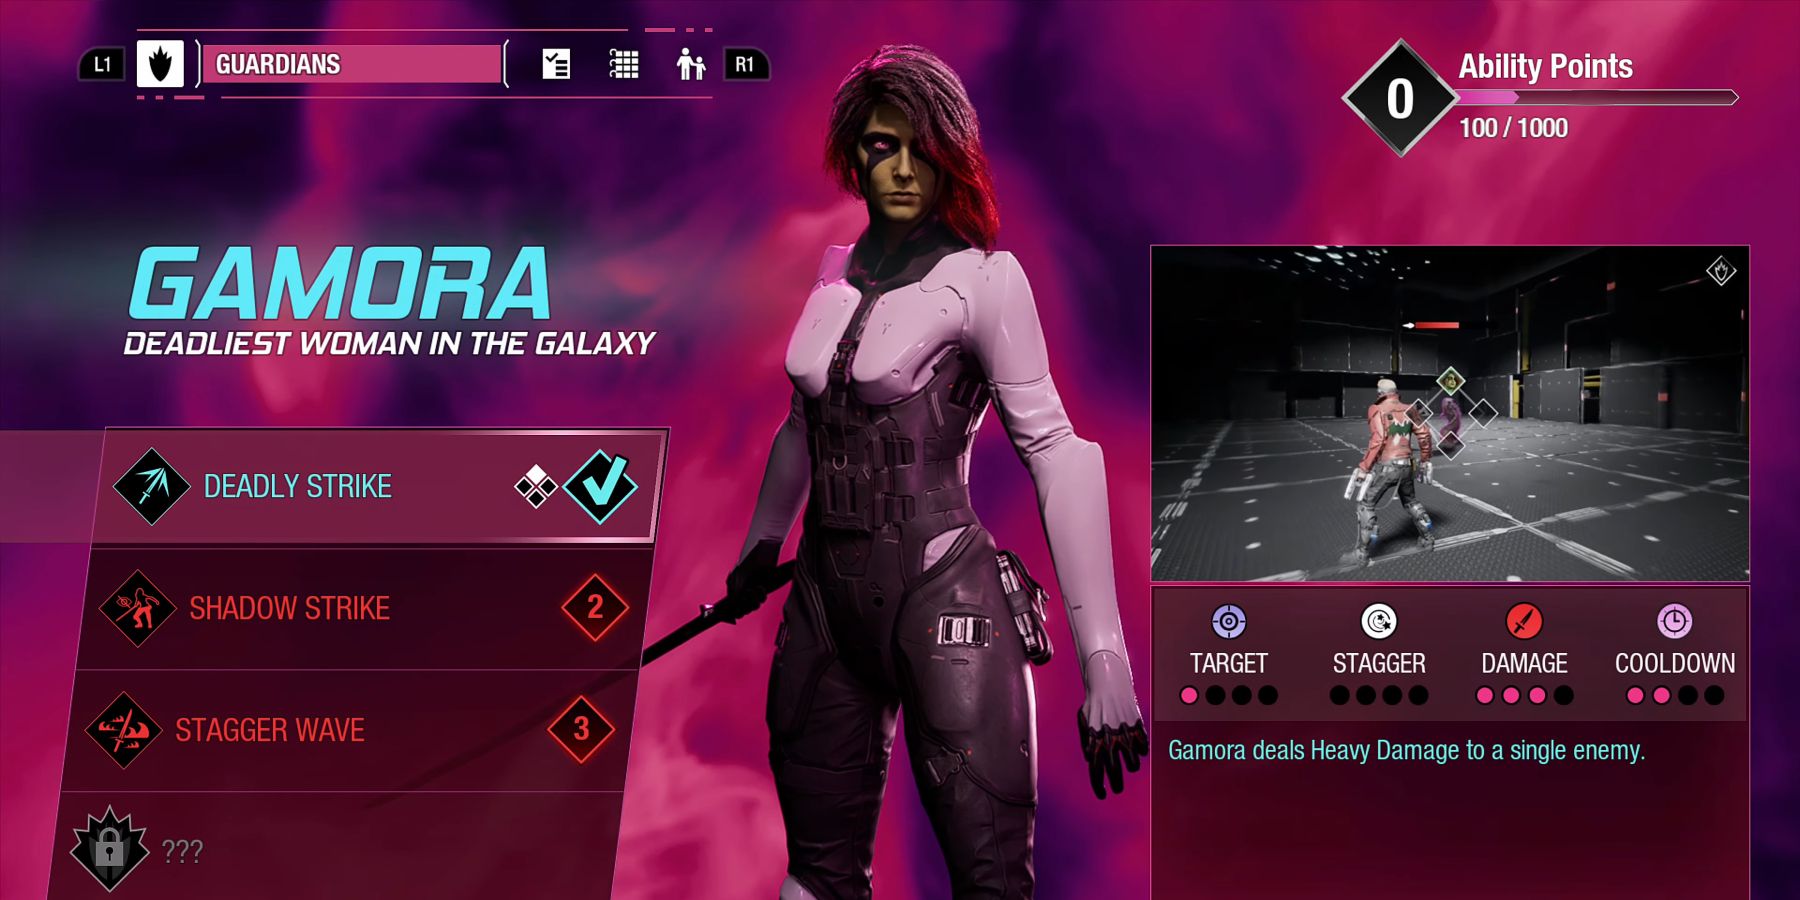 Gamora's ability upgrade screen in Marvel's Guardians Of The Galaxy